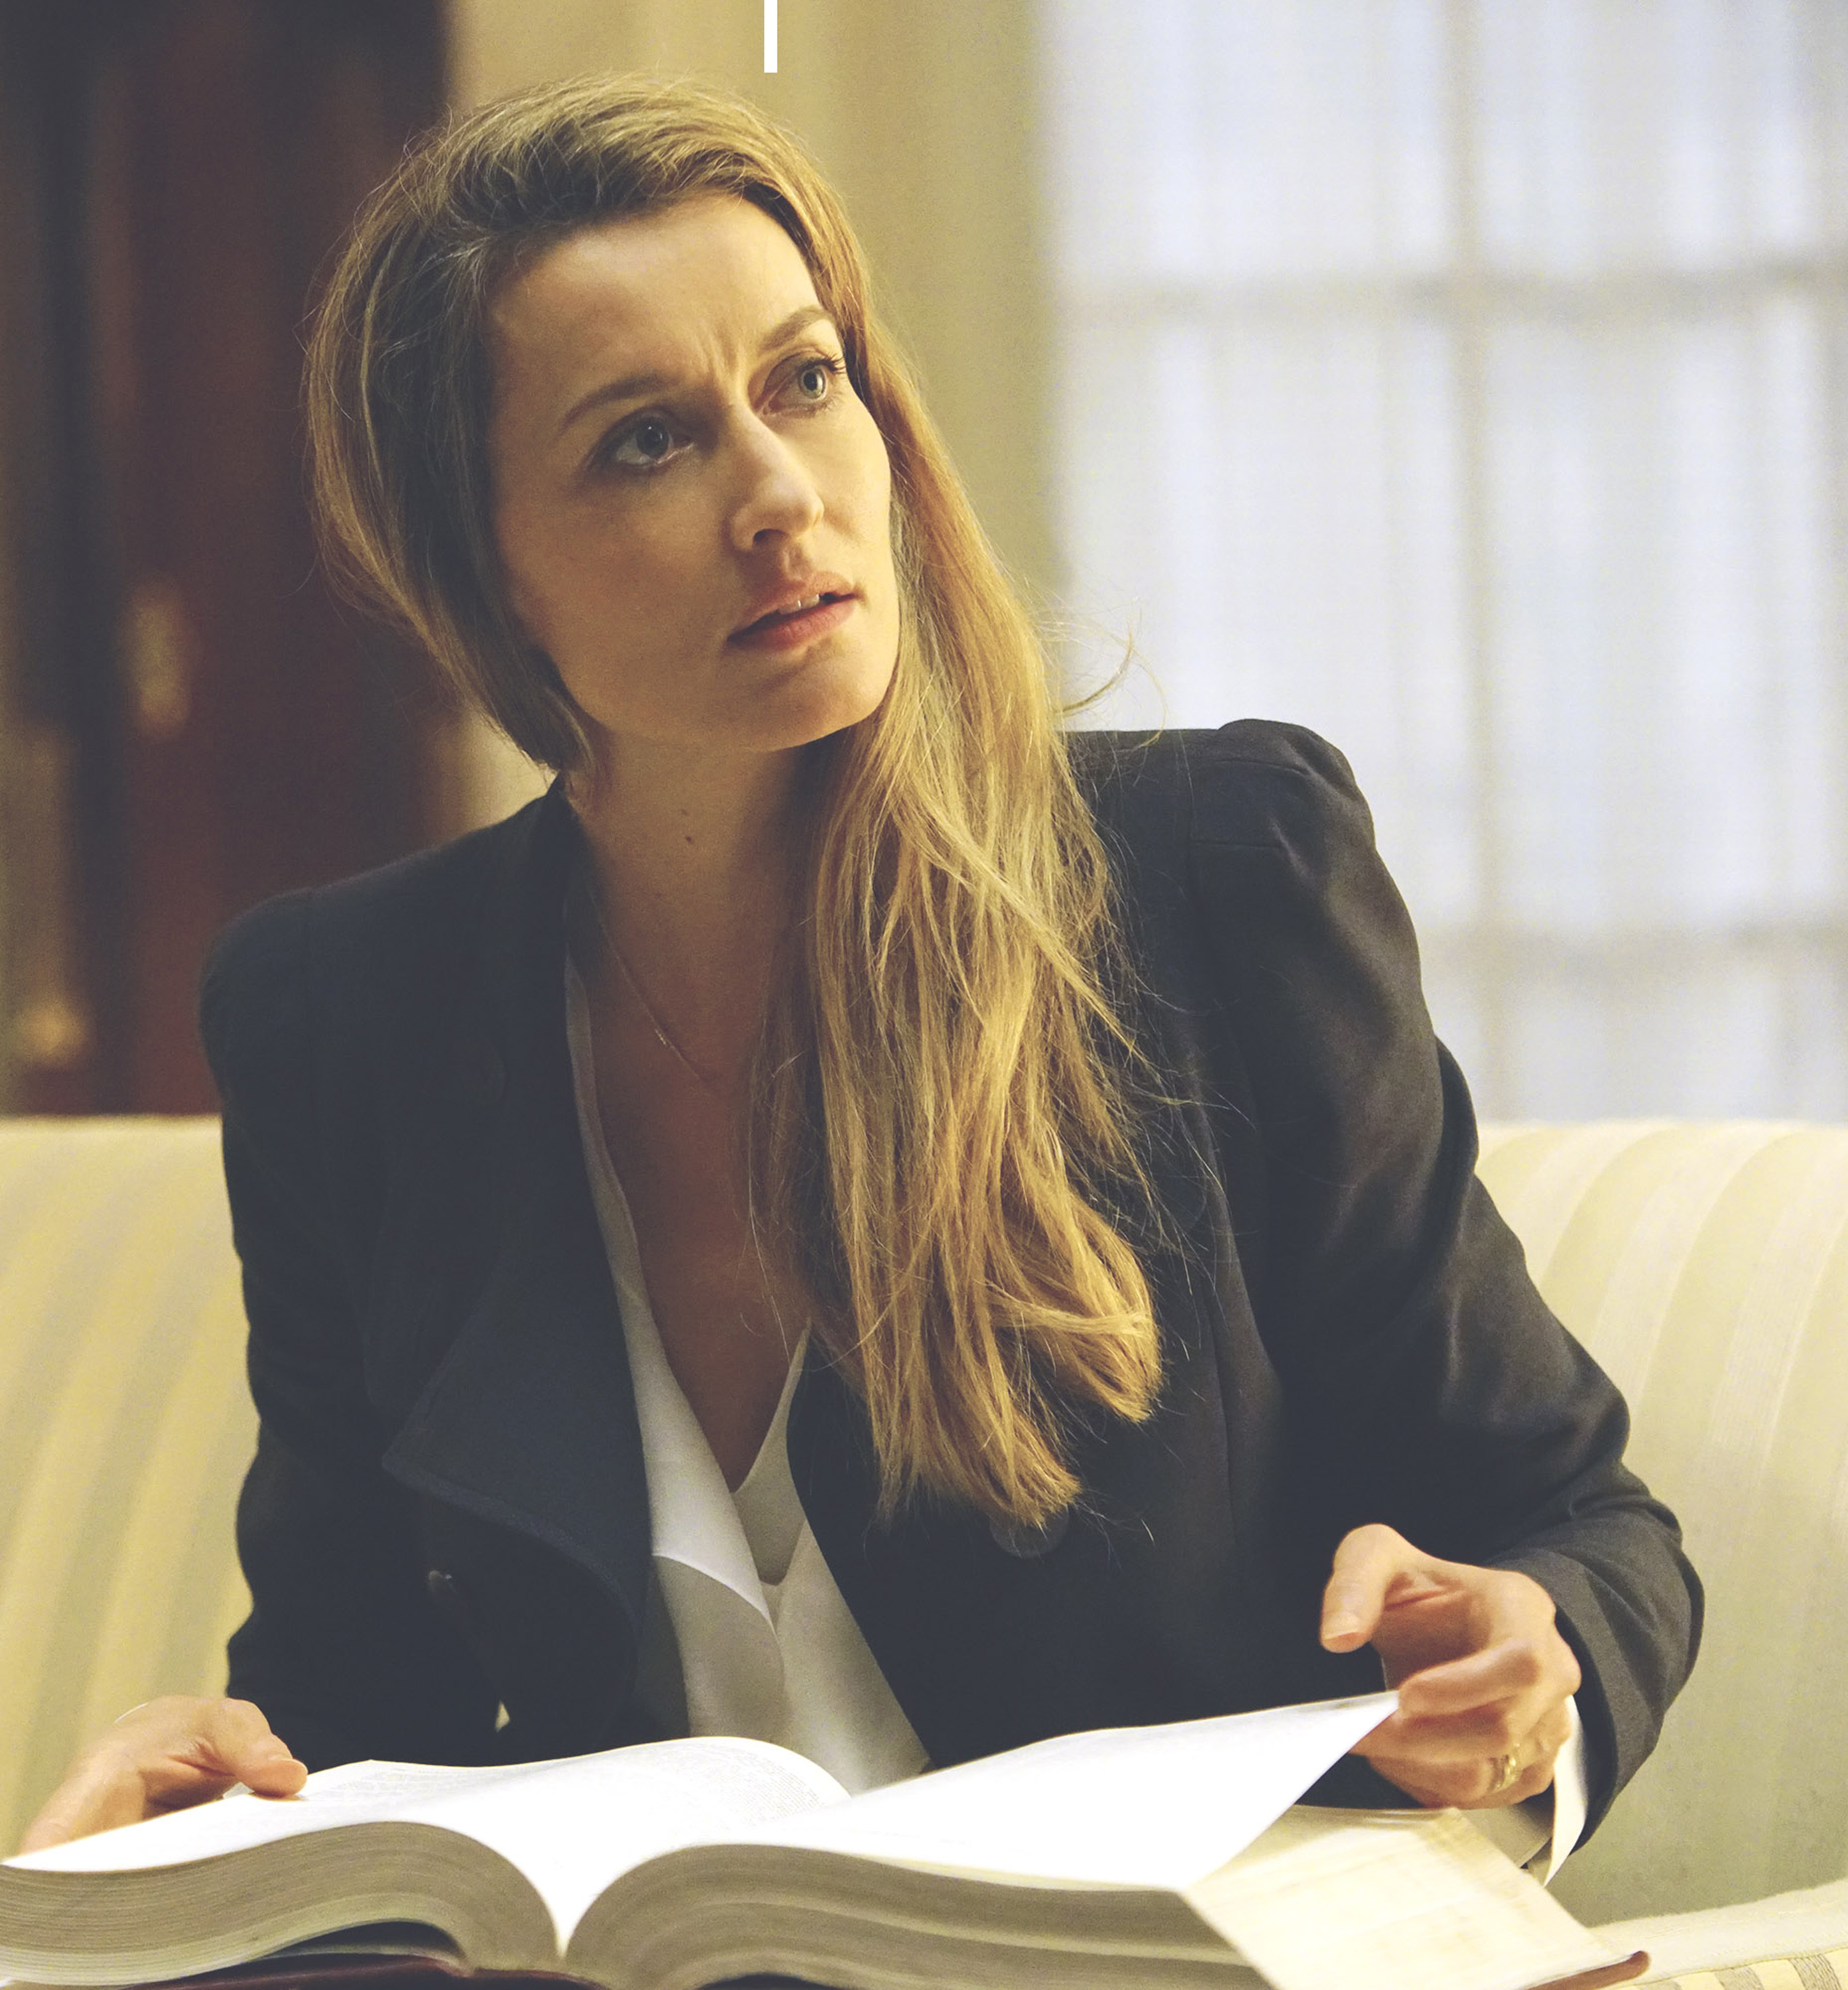 Natascha McElhone plays the First Lady and Kiefer Sutherland stars as Tom Kirkman, a lower-level cabinet member who is suddenly appointed President of the United States after a catastrophic attack on the U.S. Capitol during the State of the Union, on the highly anticipated ABC series "Designated Survivor,"premiering Sept. 21. (Ian Watson/ABC)